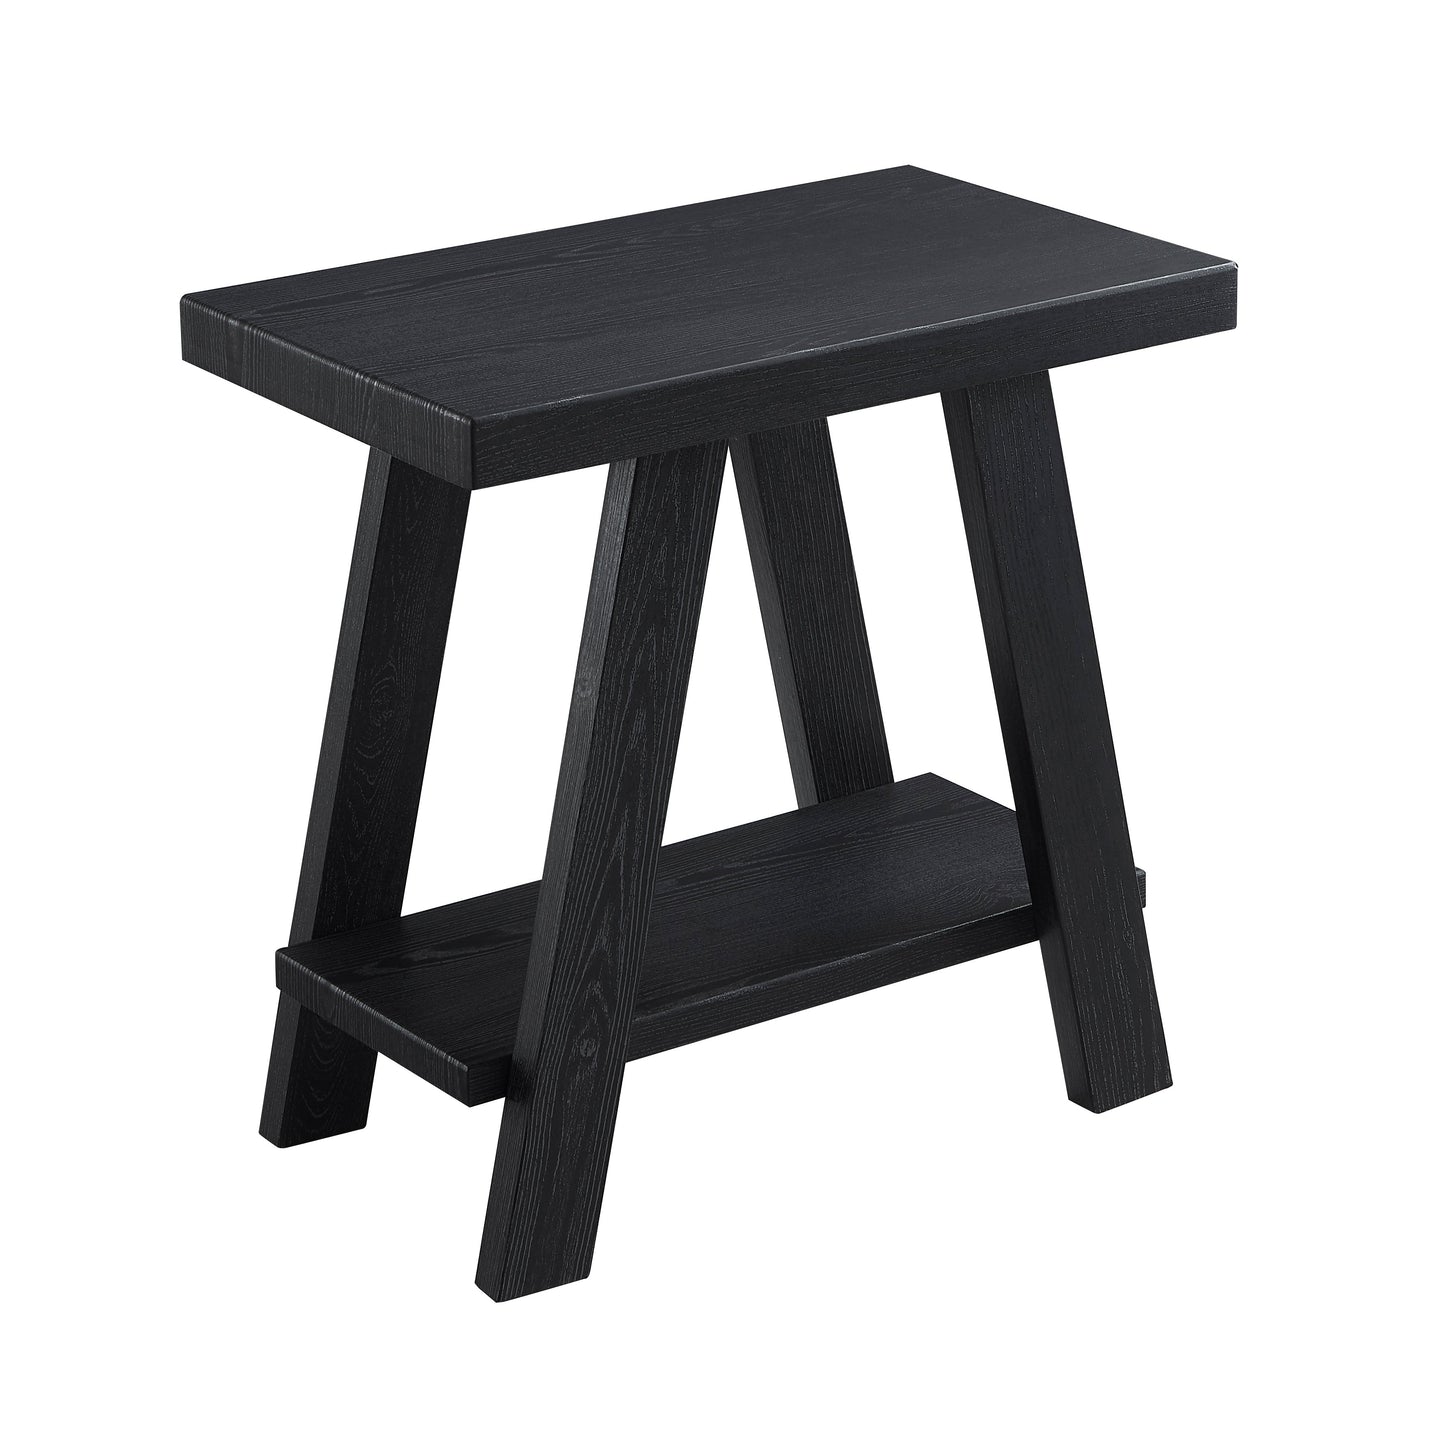 Athens Contemporary Wood Shelf Side Table in Black Finish